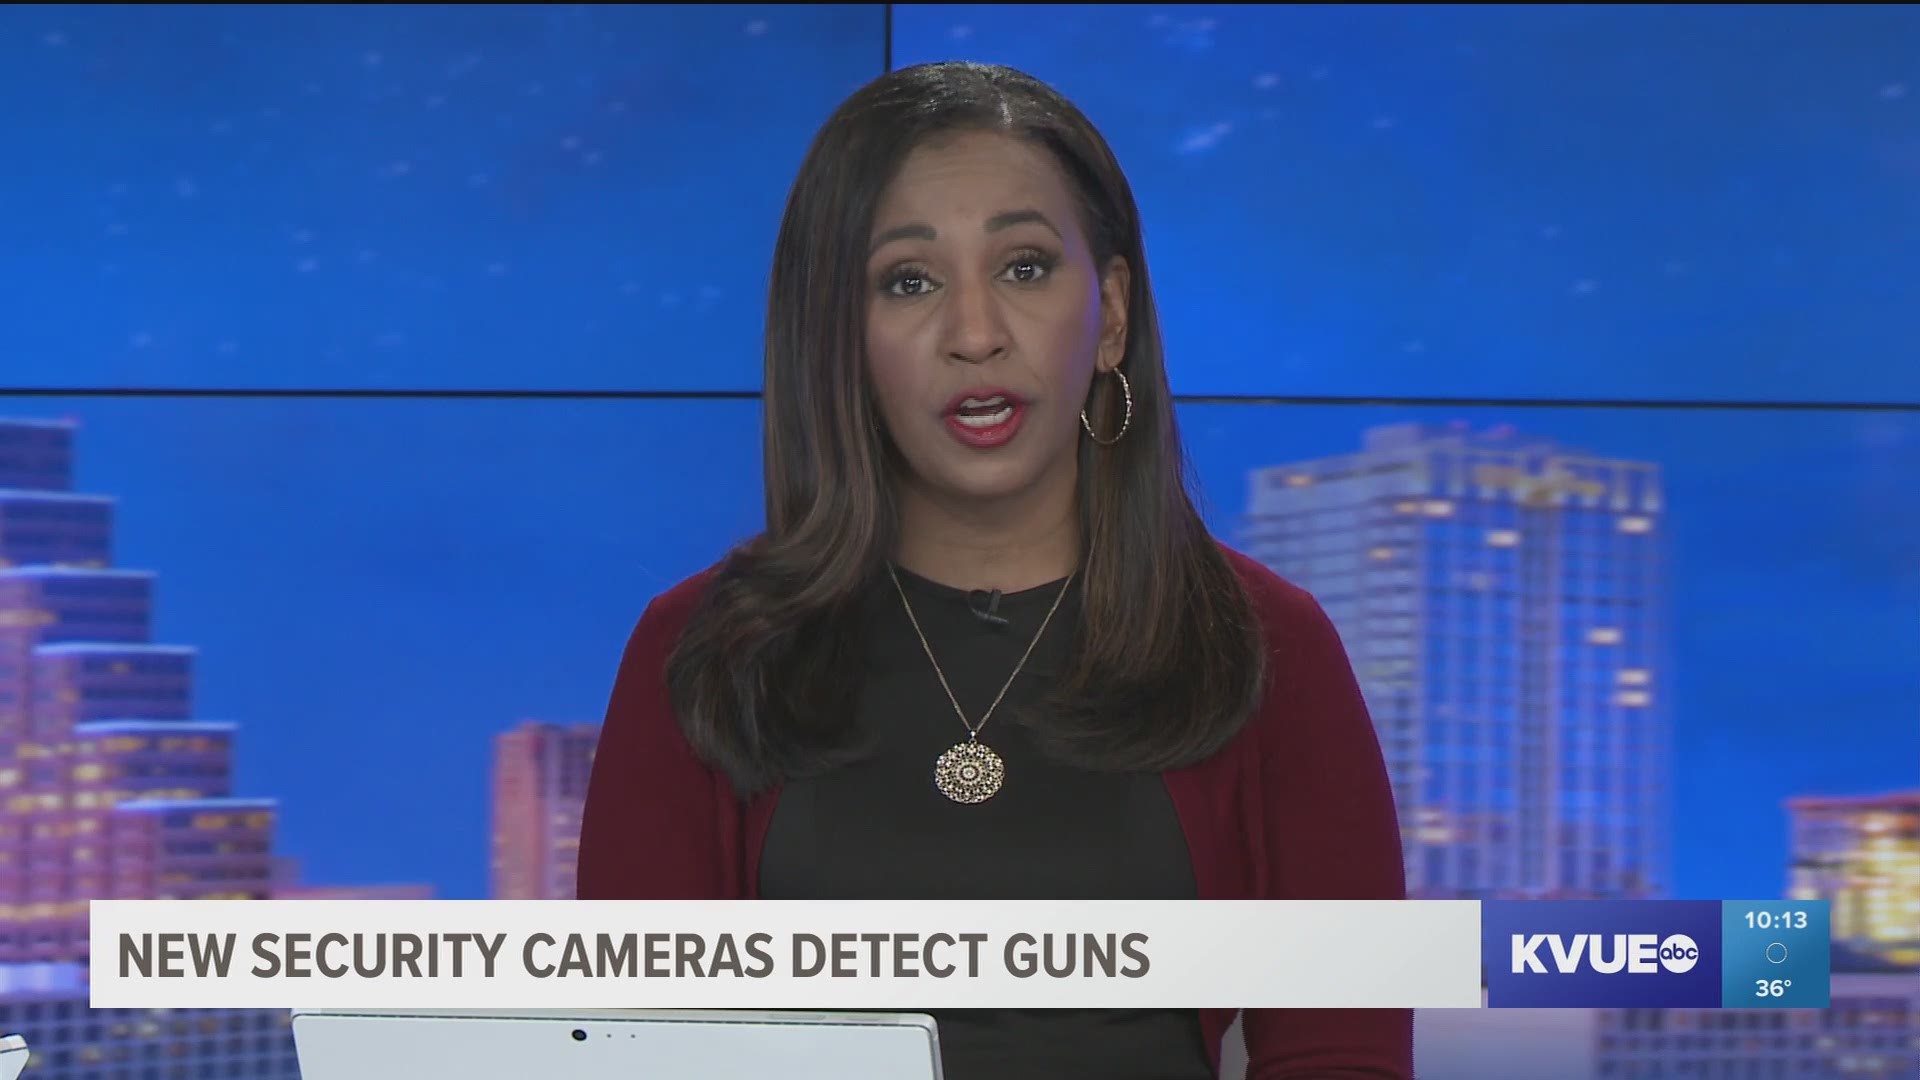 There have been 310 mass shootings in America this year. From Sante Fe to Thousand Oaks, we've heard the stories and seen the problem. Now an Austin-based company is working on a solution. KVUE's Kalyn Norwood shares how Athena security is using new techn